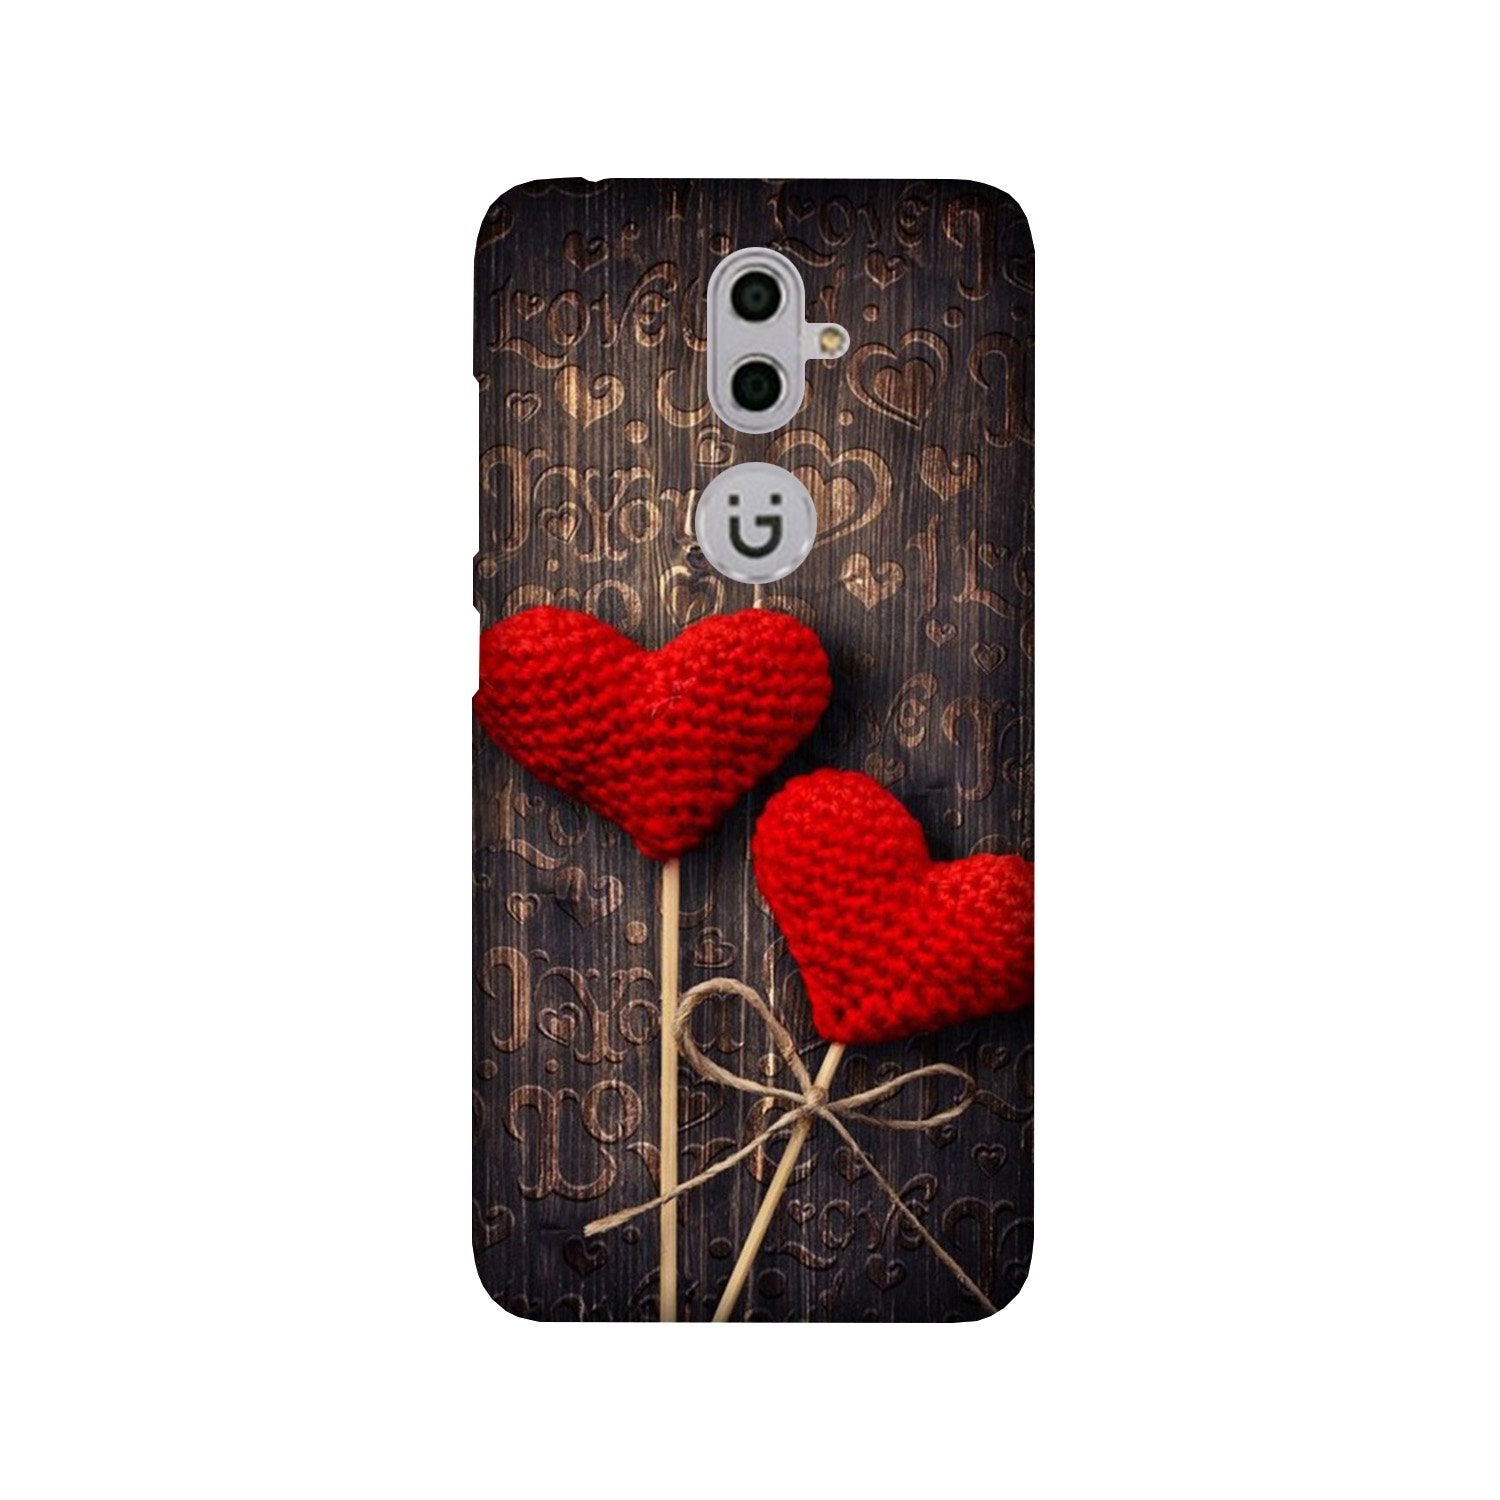 Red Hearts Case for Gionee S9